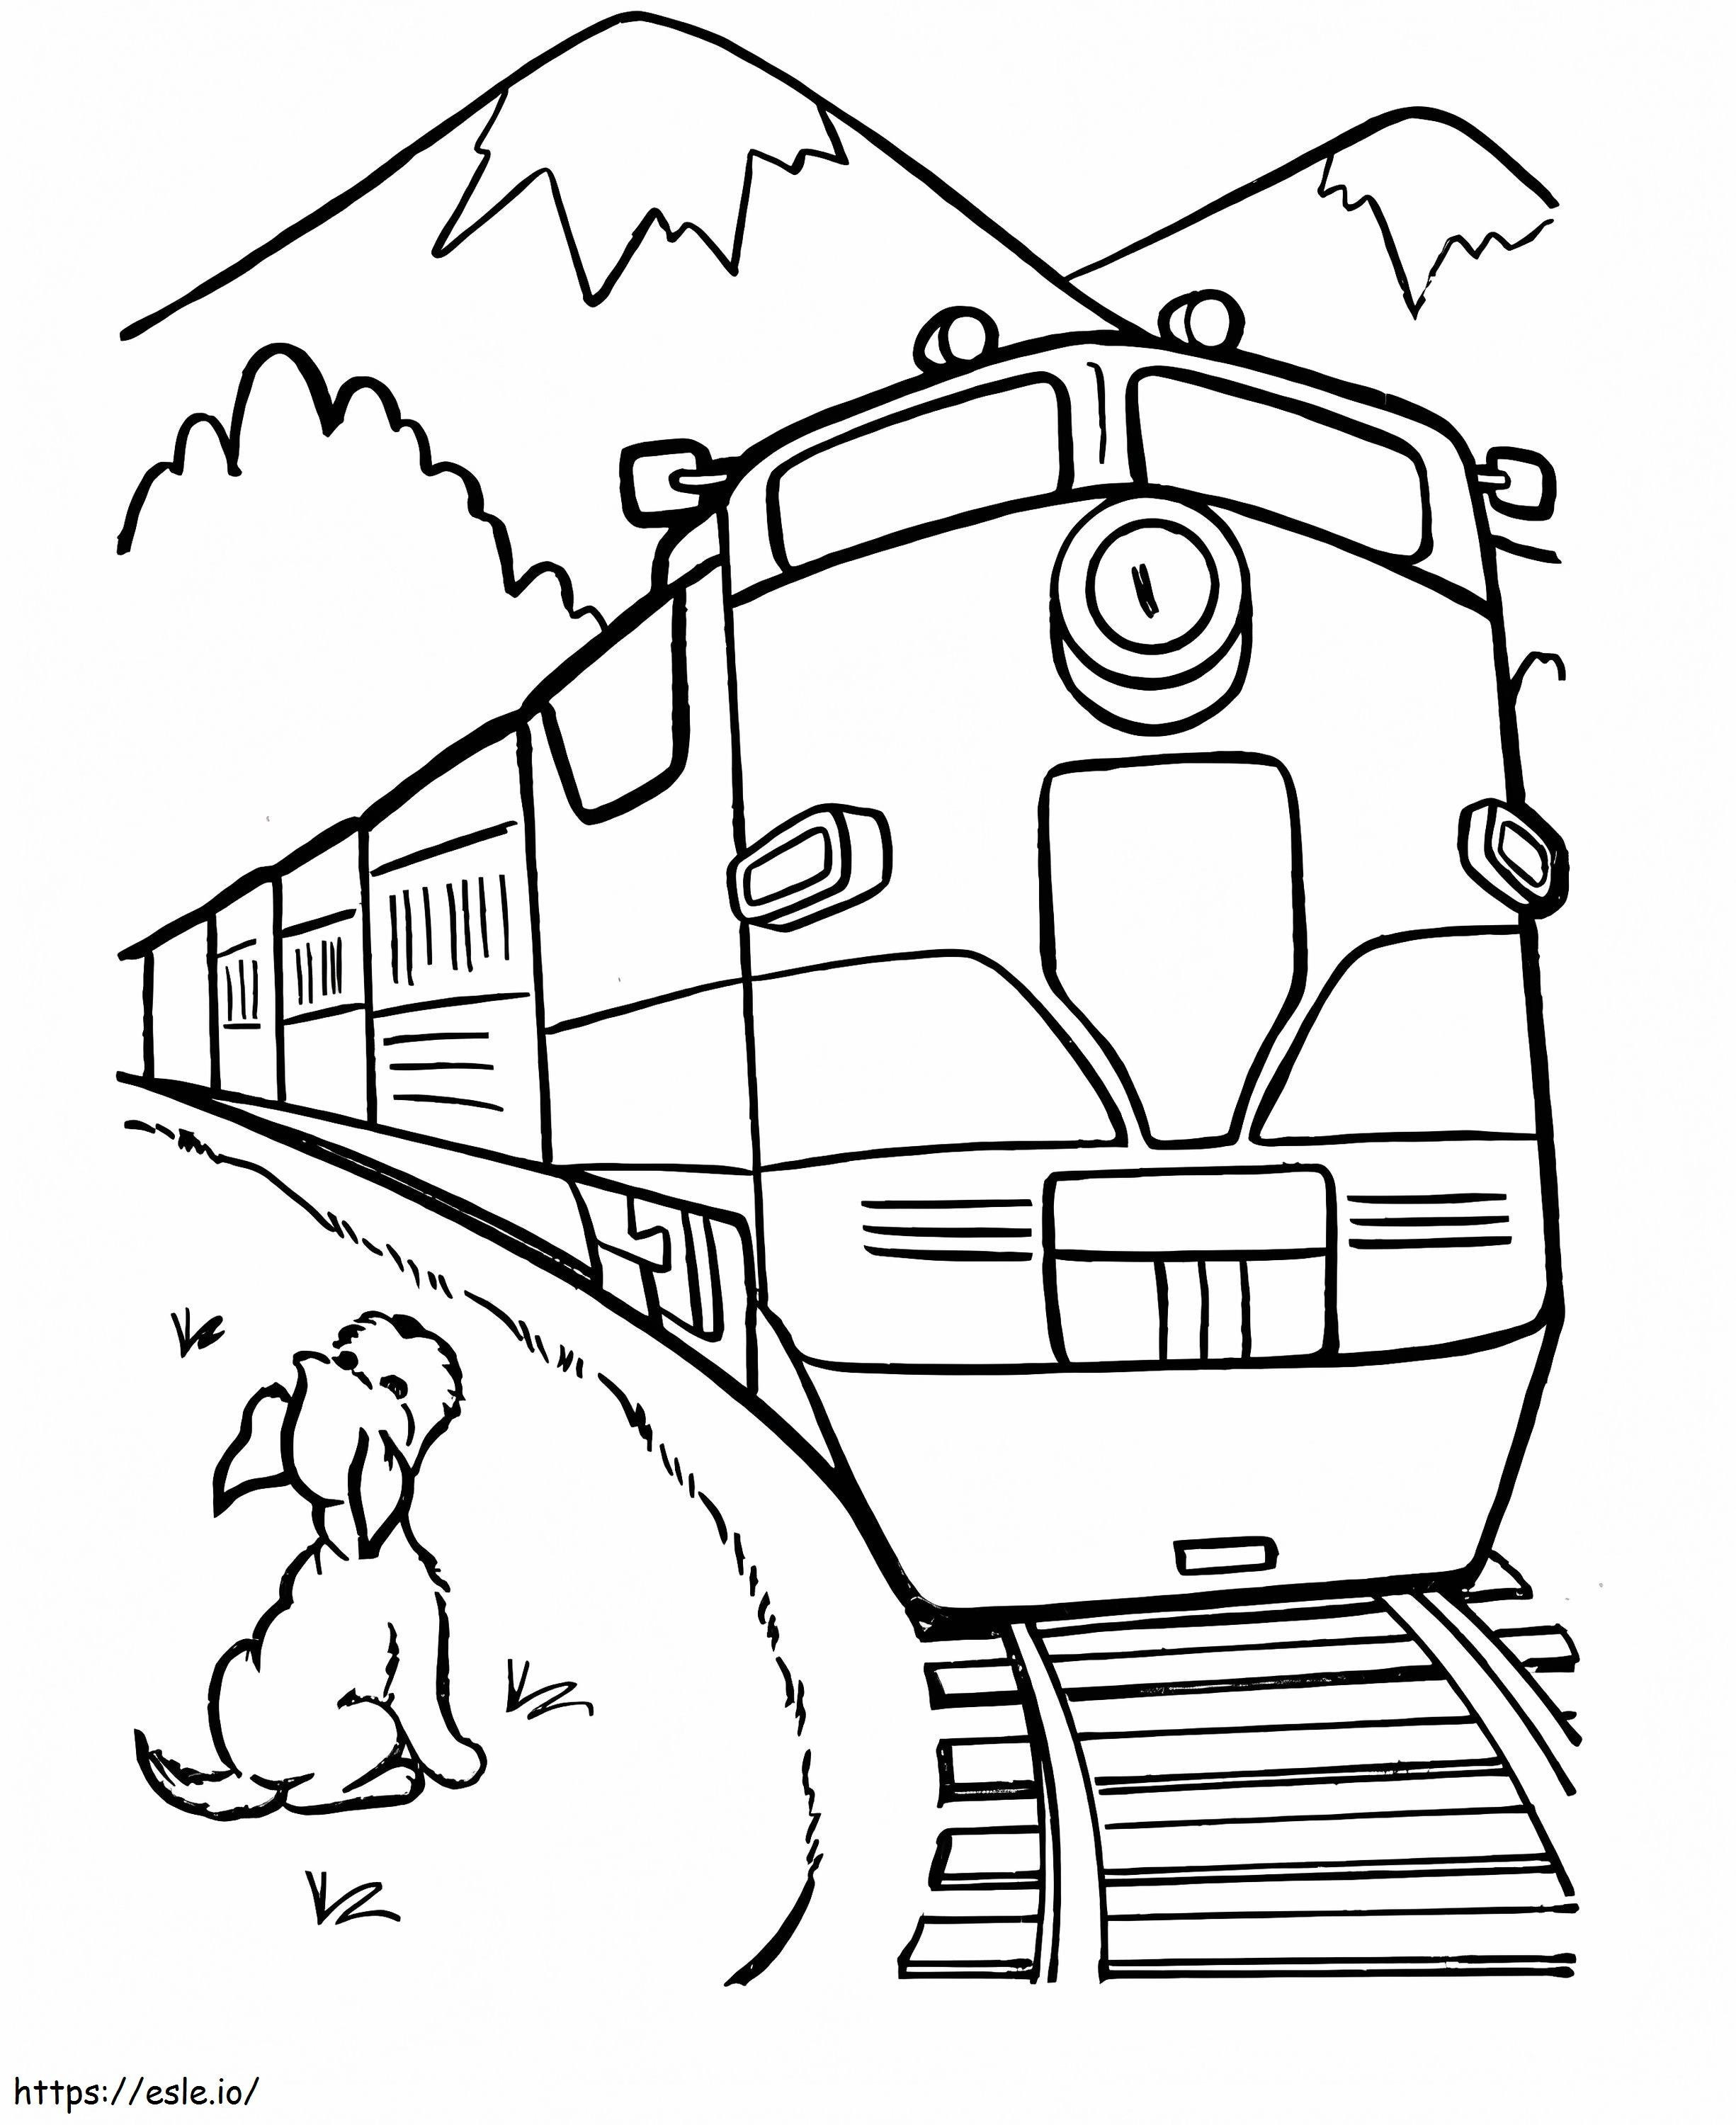 Puppy And Train coloring page